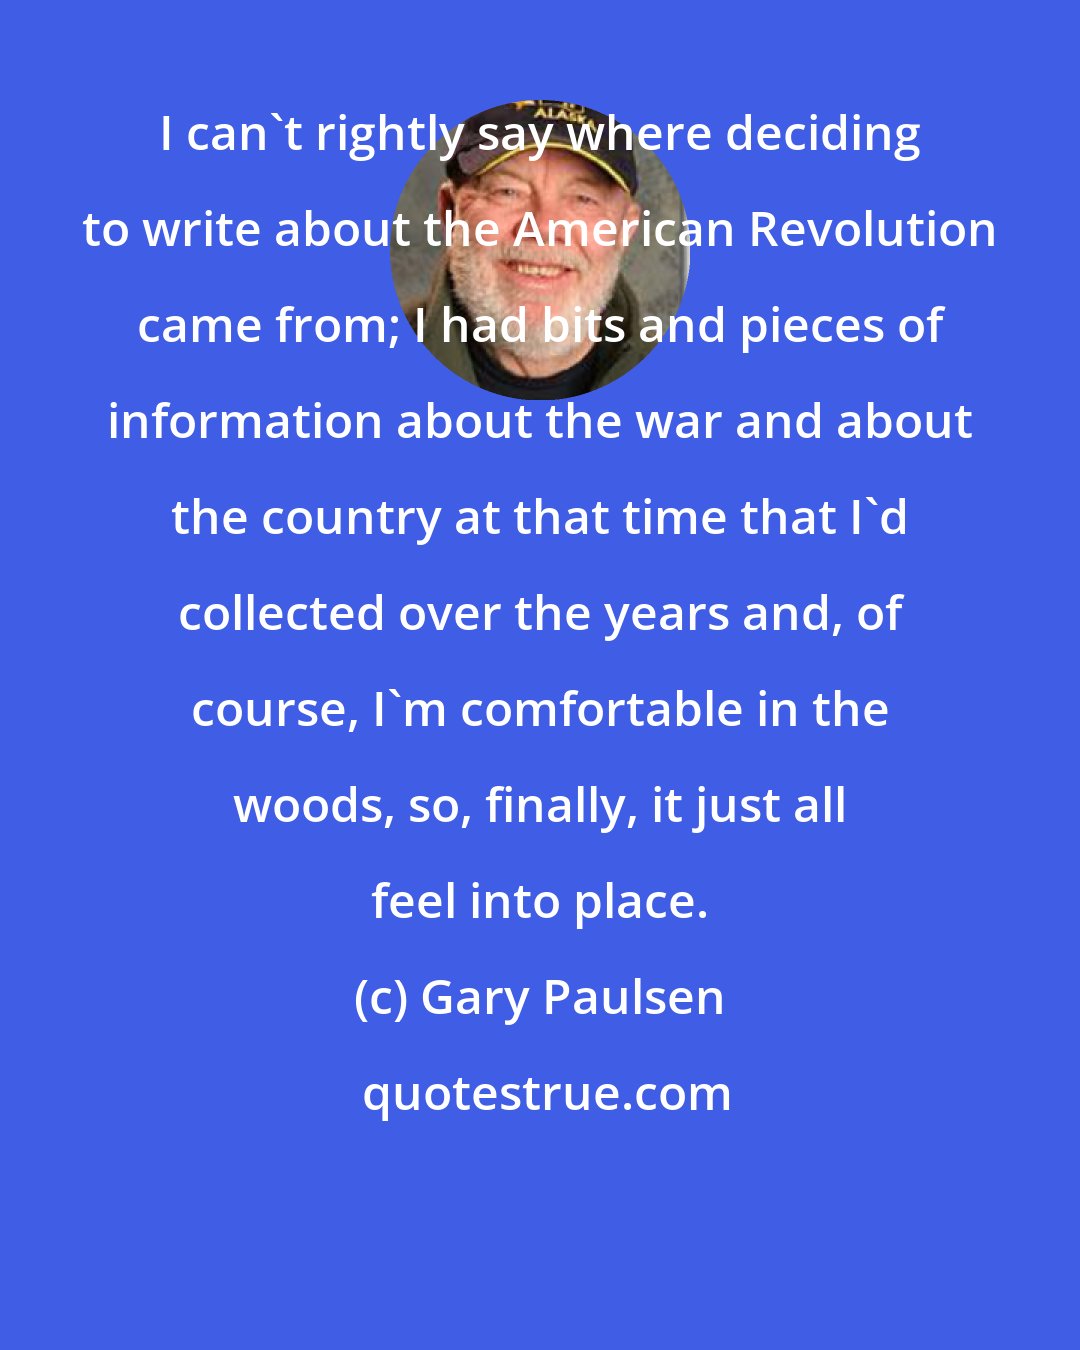 Gary Paulsen: I can't rightly say where deciding to write about the American Revolution came from; I had bits and pieces of information about the war and about the country at that time that I'd collected over the years and, of course, I'm comfortable in the woods, so, finally, it just all feel into place.